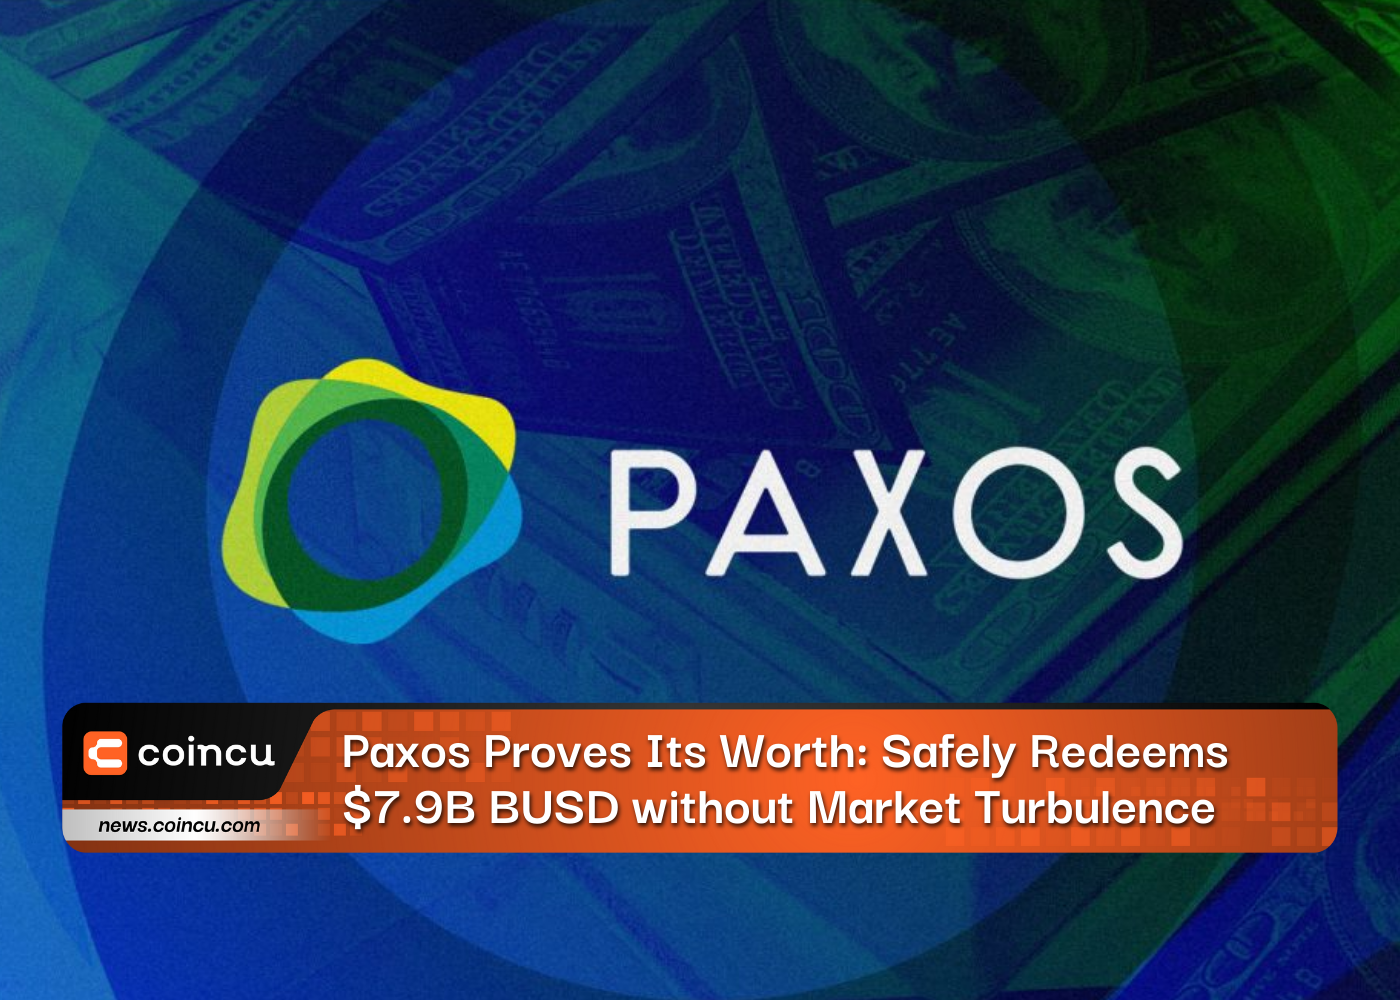 Paxos Proves Its Worth: Safely Redeems $7.9B BUSD without Market Turbulence